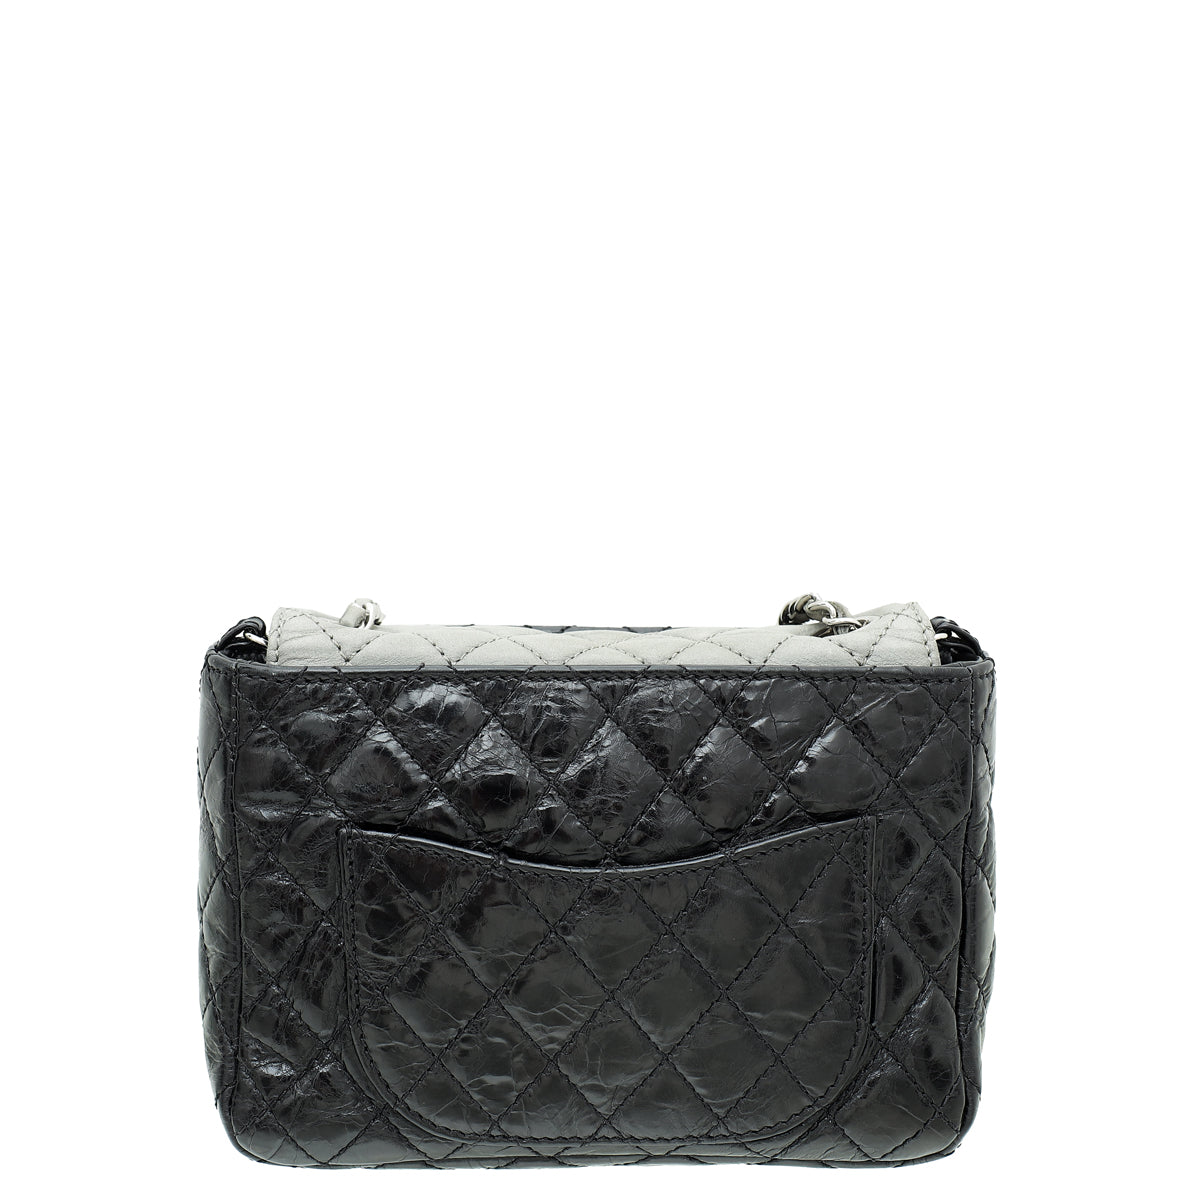 Chanel Black Aged Quilted Leather Mini Reissue Camera Bag at